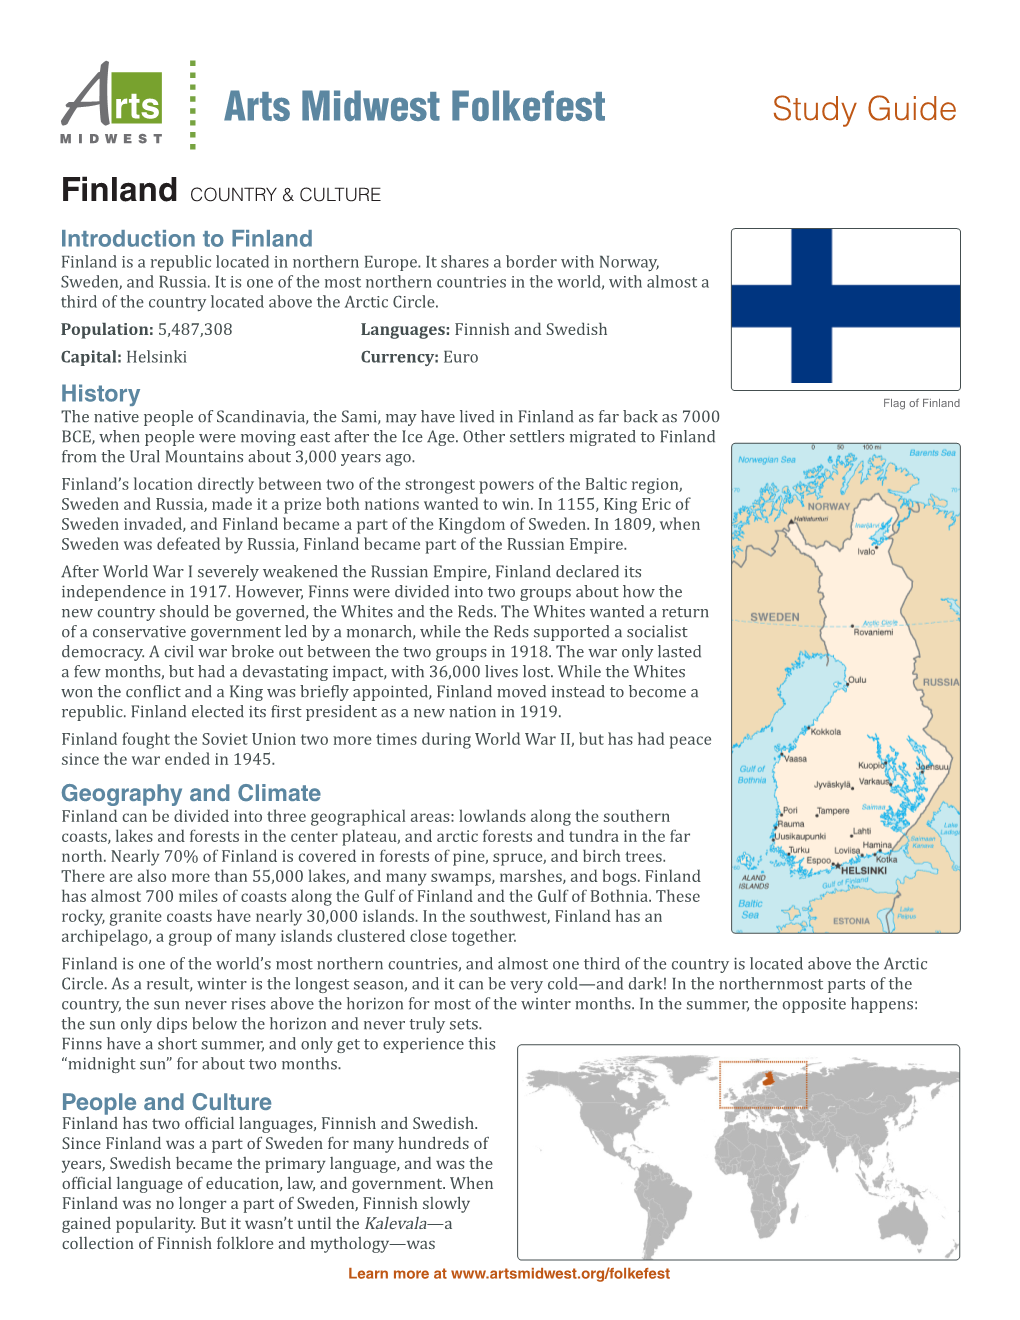 Country and Culture of Finland